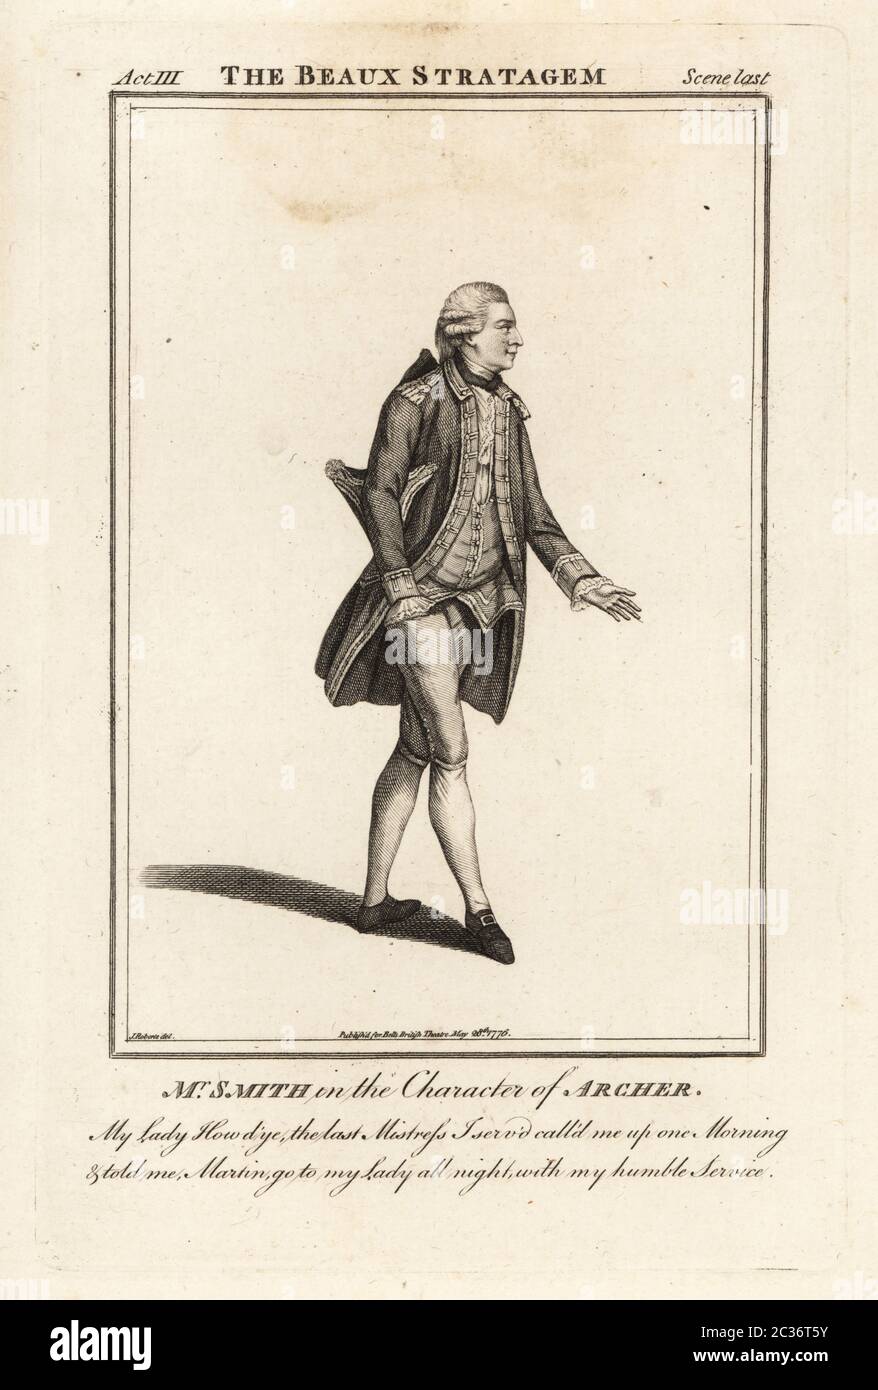 Mr. William Smith in the character of Archer in George Farquhar’s The Beaux’ Stratagem, Covent Garden Theatre, 1756. Smith was an English actor and theatre manager, 1730-1819. Copperplate engraving after an illustration by James Roberts from Bell’s British Theatre, Consisting of the most esteemed English Plays, John Bell, London, 1776. Stock Photo